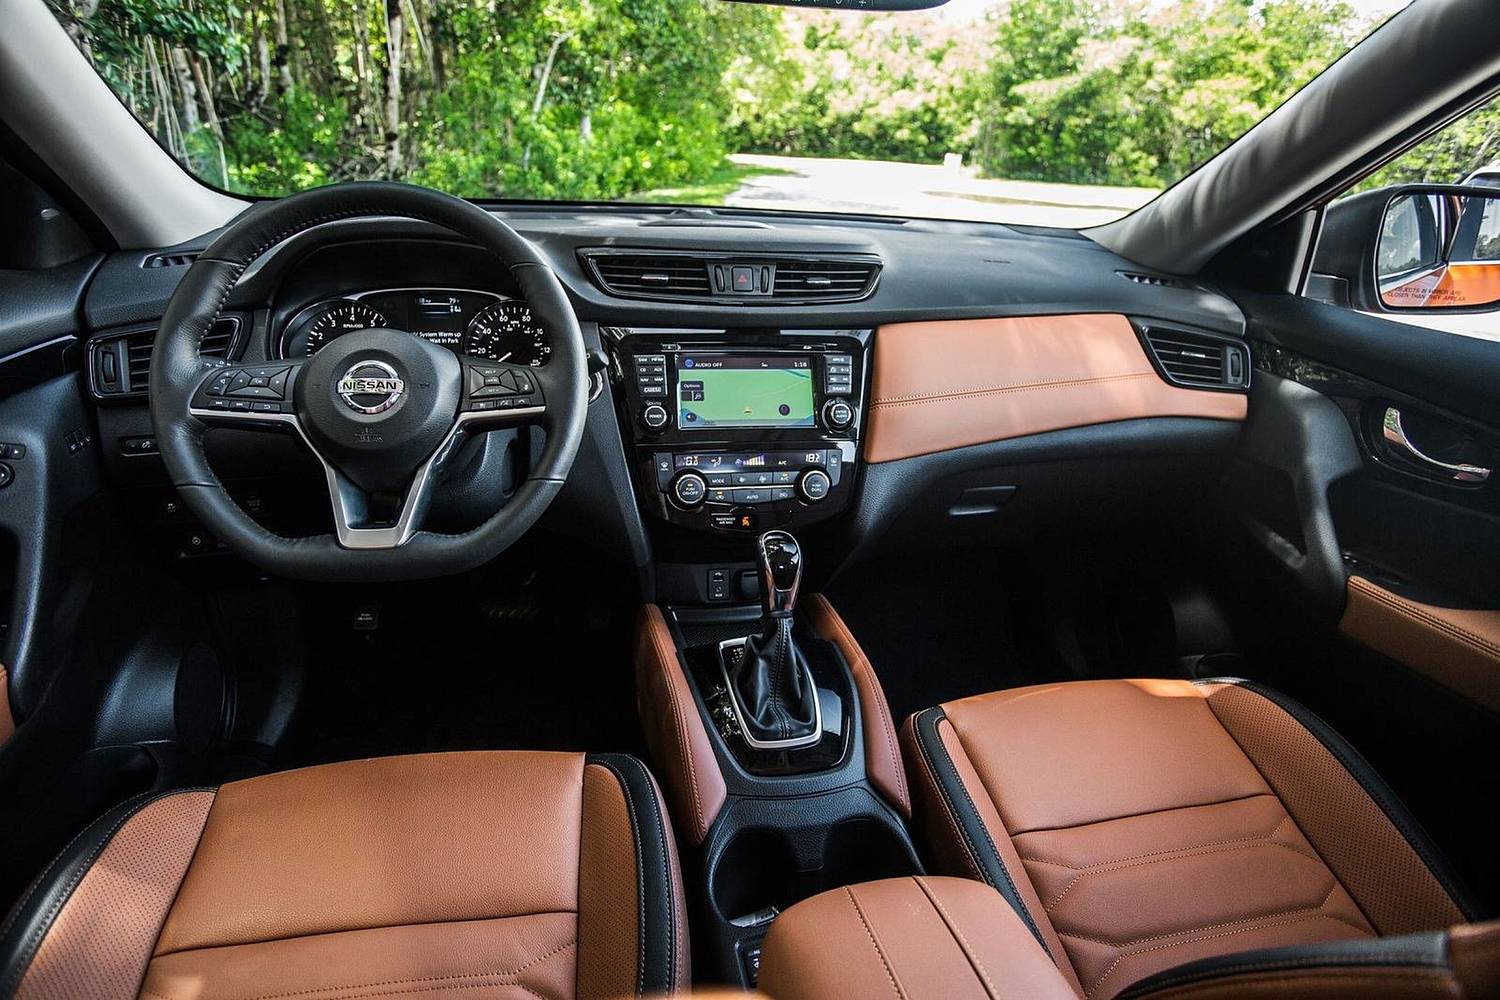 Nissan Rogue SL 4dr SUV Dashboard. Platinum Reserve Package Shown. (2017 model year shown)